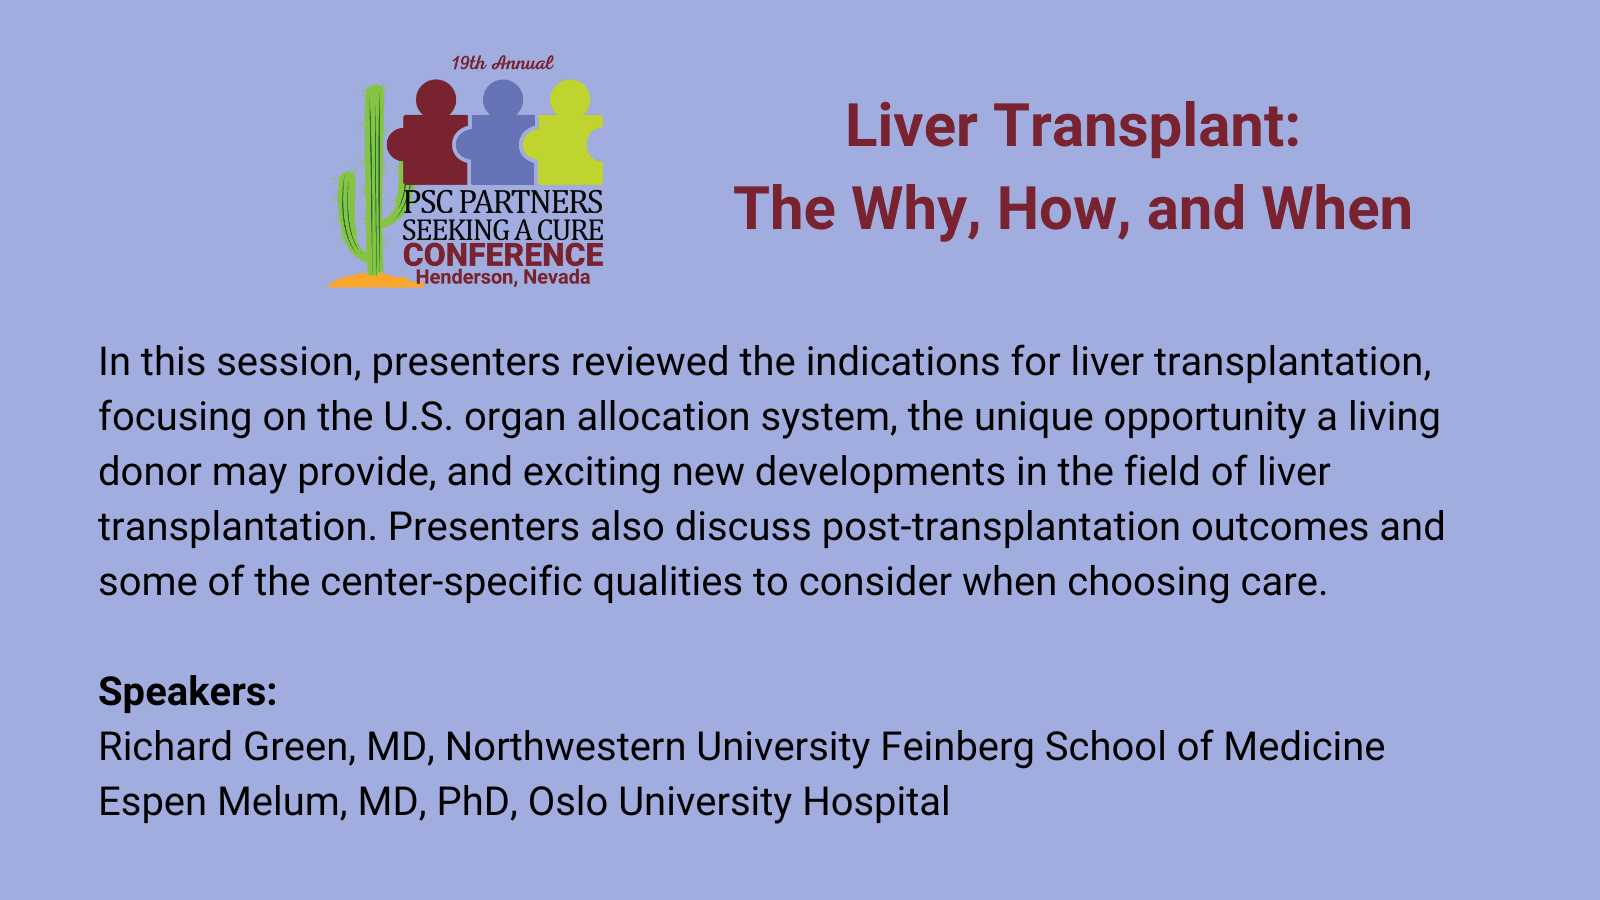 Liver Transplant: The Why, How, and When